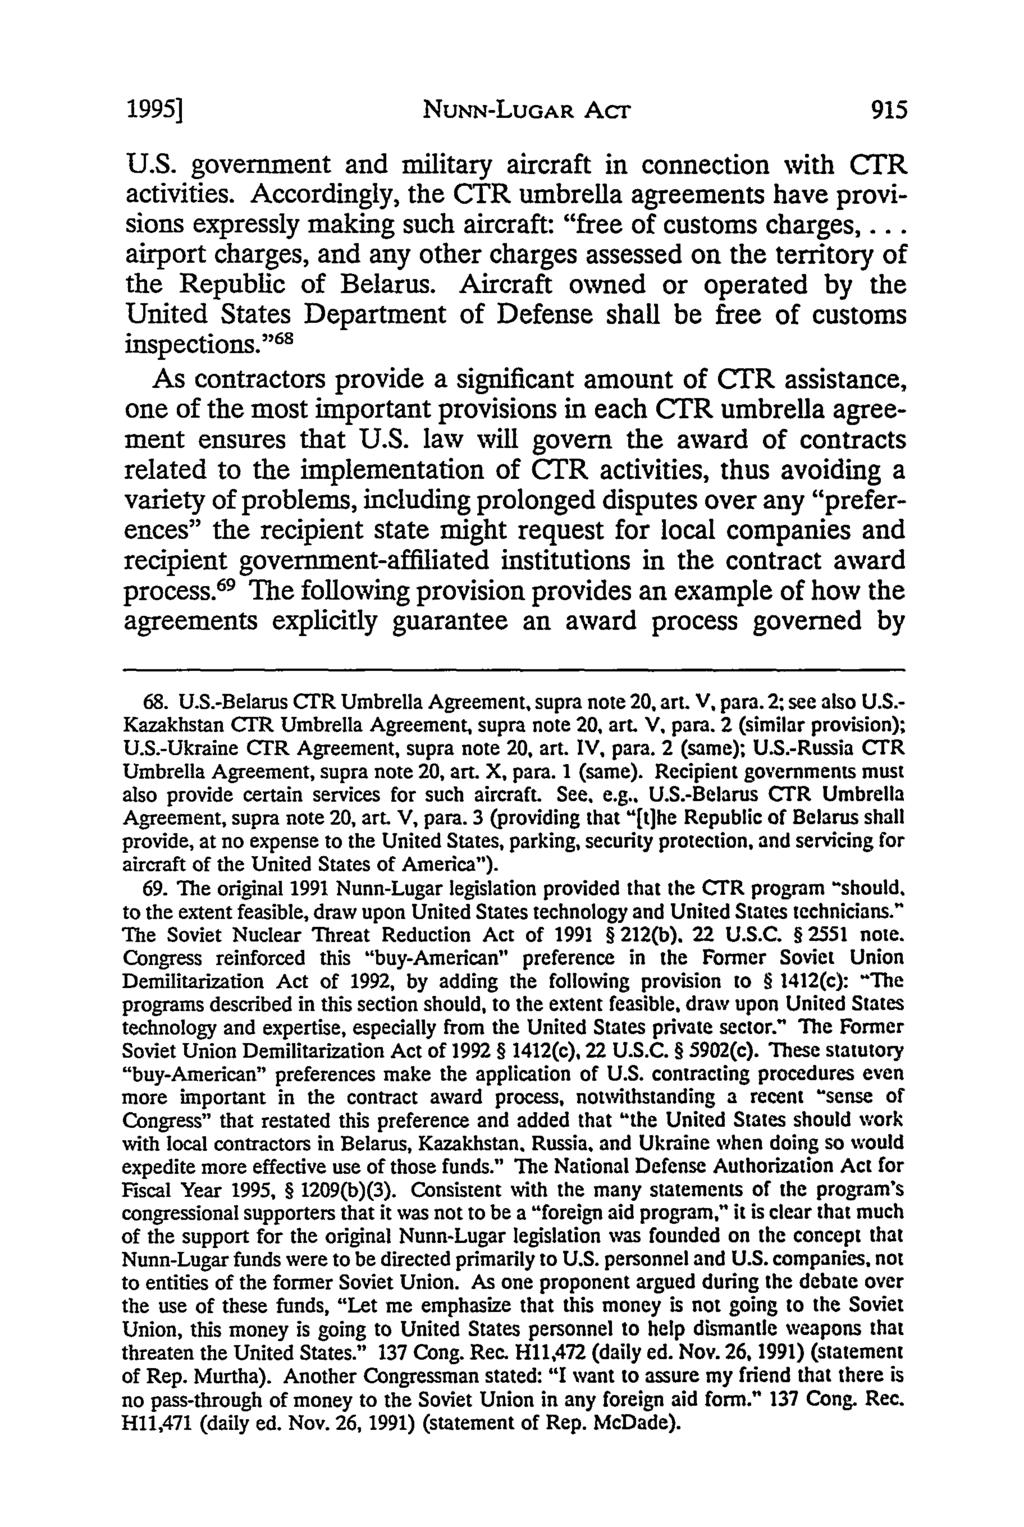 1995] NUNN-LUGAR AcT U.S. government and military aircraft in connection with CTR activities.